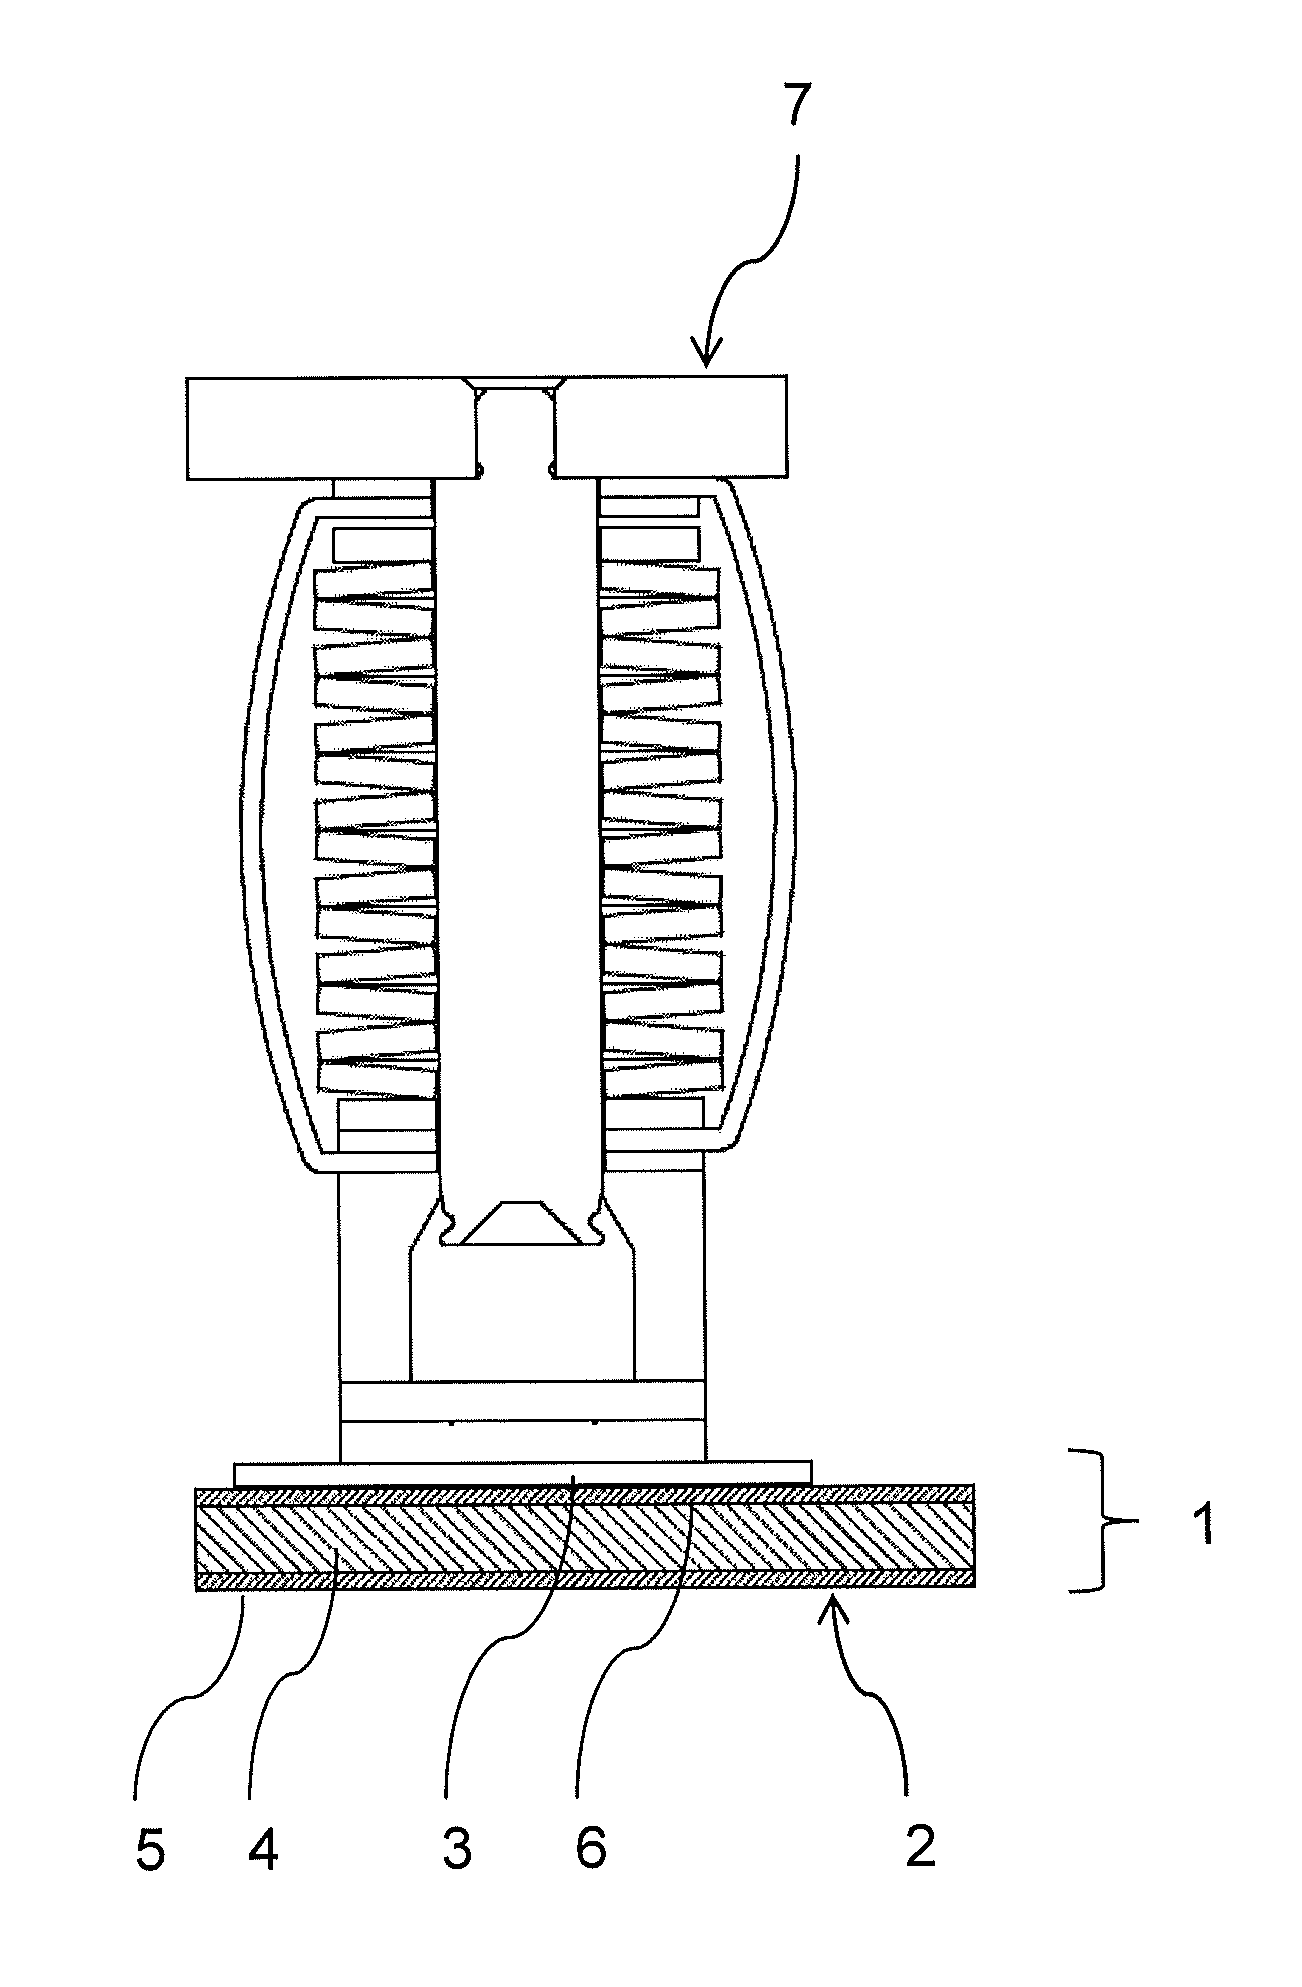 Power semiconductor arrangement, power semiconductor module with multiple power semiconductor arrangements, and module assembly comprising multiple power semiconductor modules